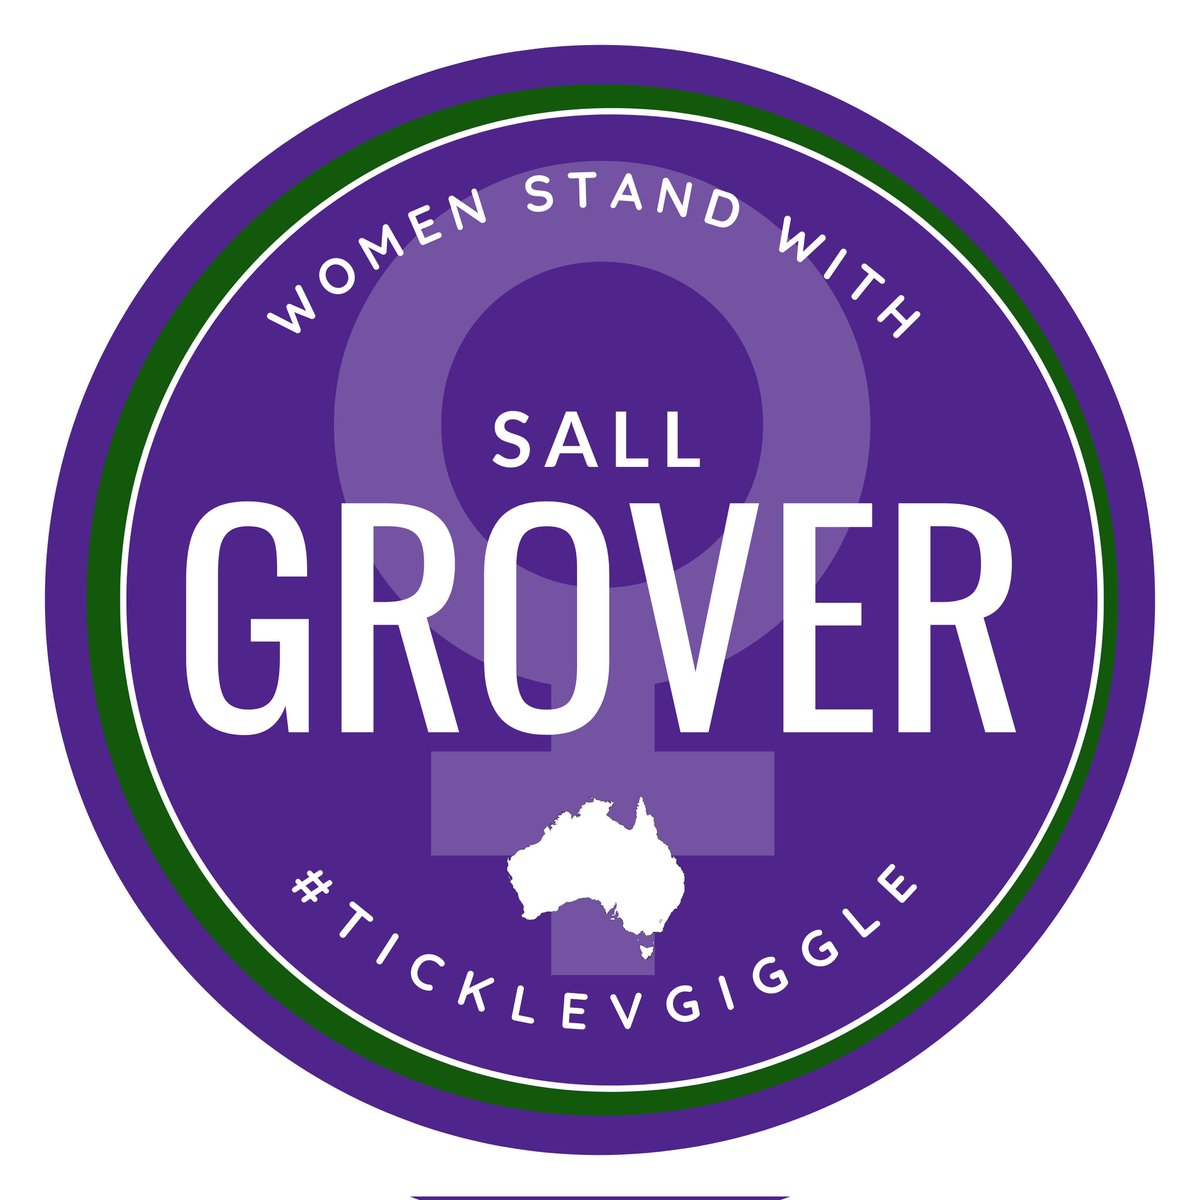 #IStandWithSallGrover 🇬🇧🇦🇺
#TicklevGiggle 
A man in a dress does not make him a woman